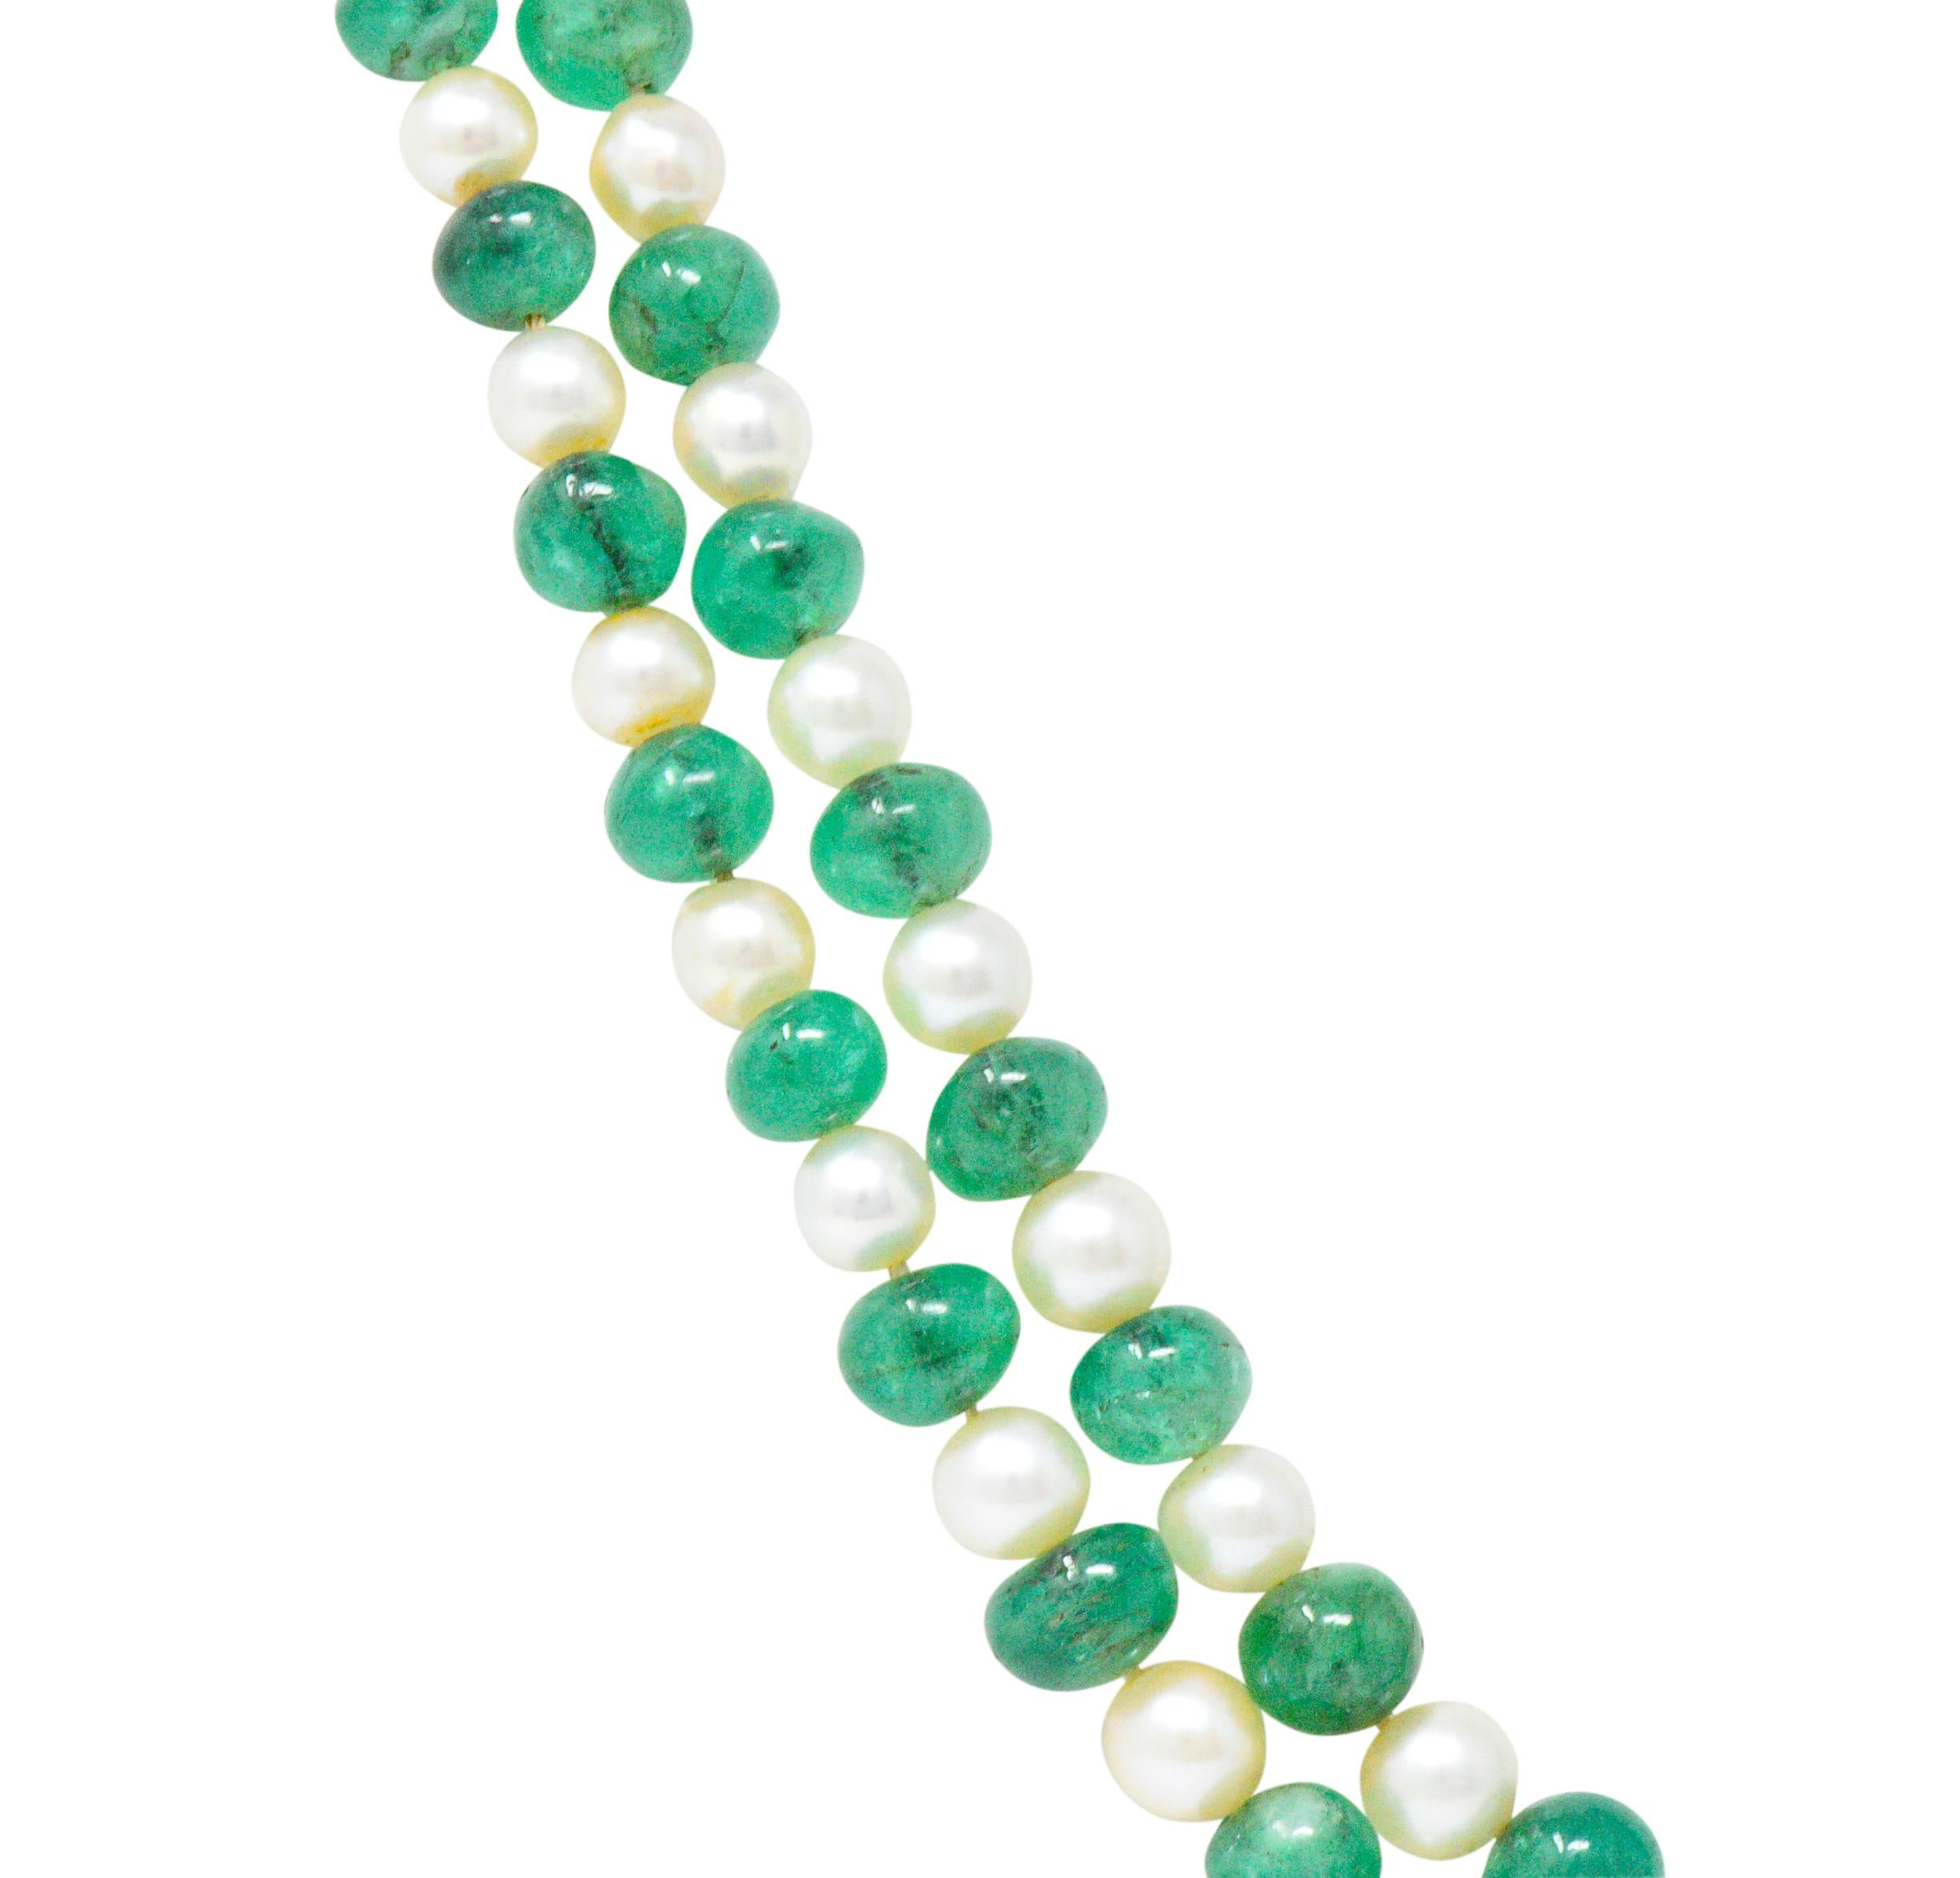 Necklace is comprised of two strands of tumbled emerald beads alternating with round cultured pearls

Emeralds are naturally included and medium-light green in color; measuring approximately 4.1 to 8.0 mm

Cultured pearls measure approximately 2.9